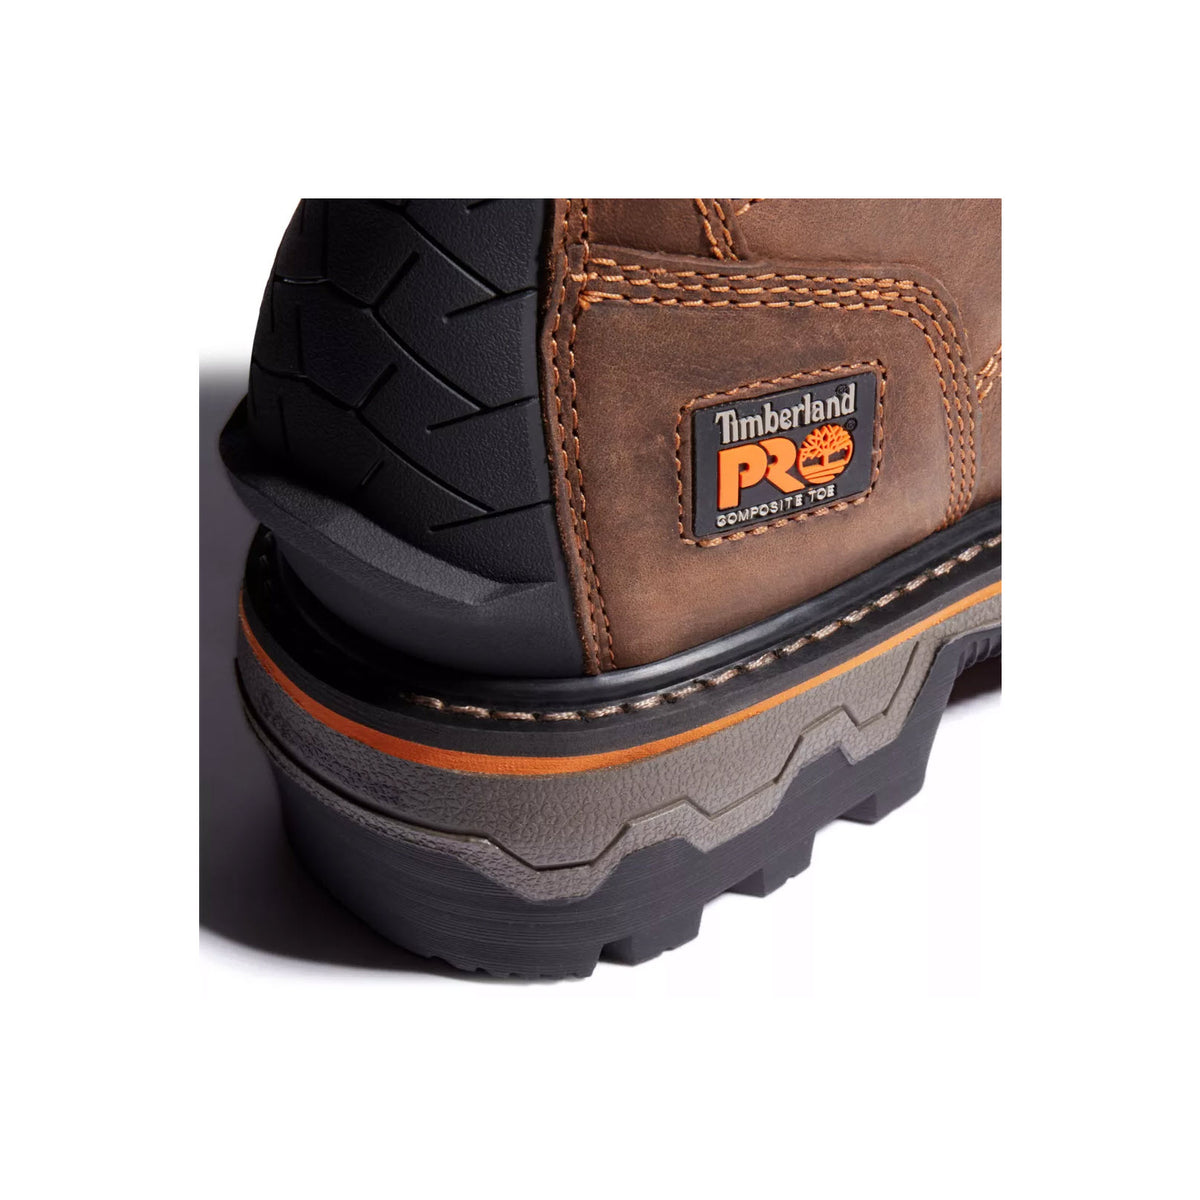 Close-up of a Timberland Pro Boondock HD Comp Toe Logger Brown - Mens work boot highlighting the brand label and tread pattern.